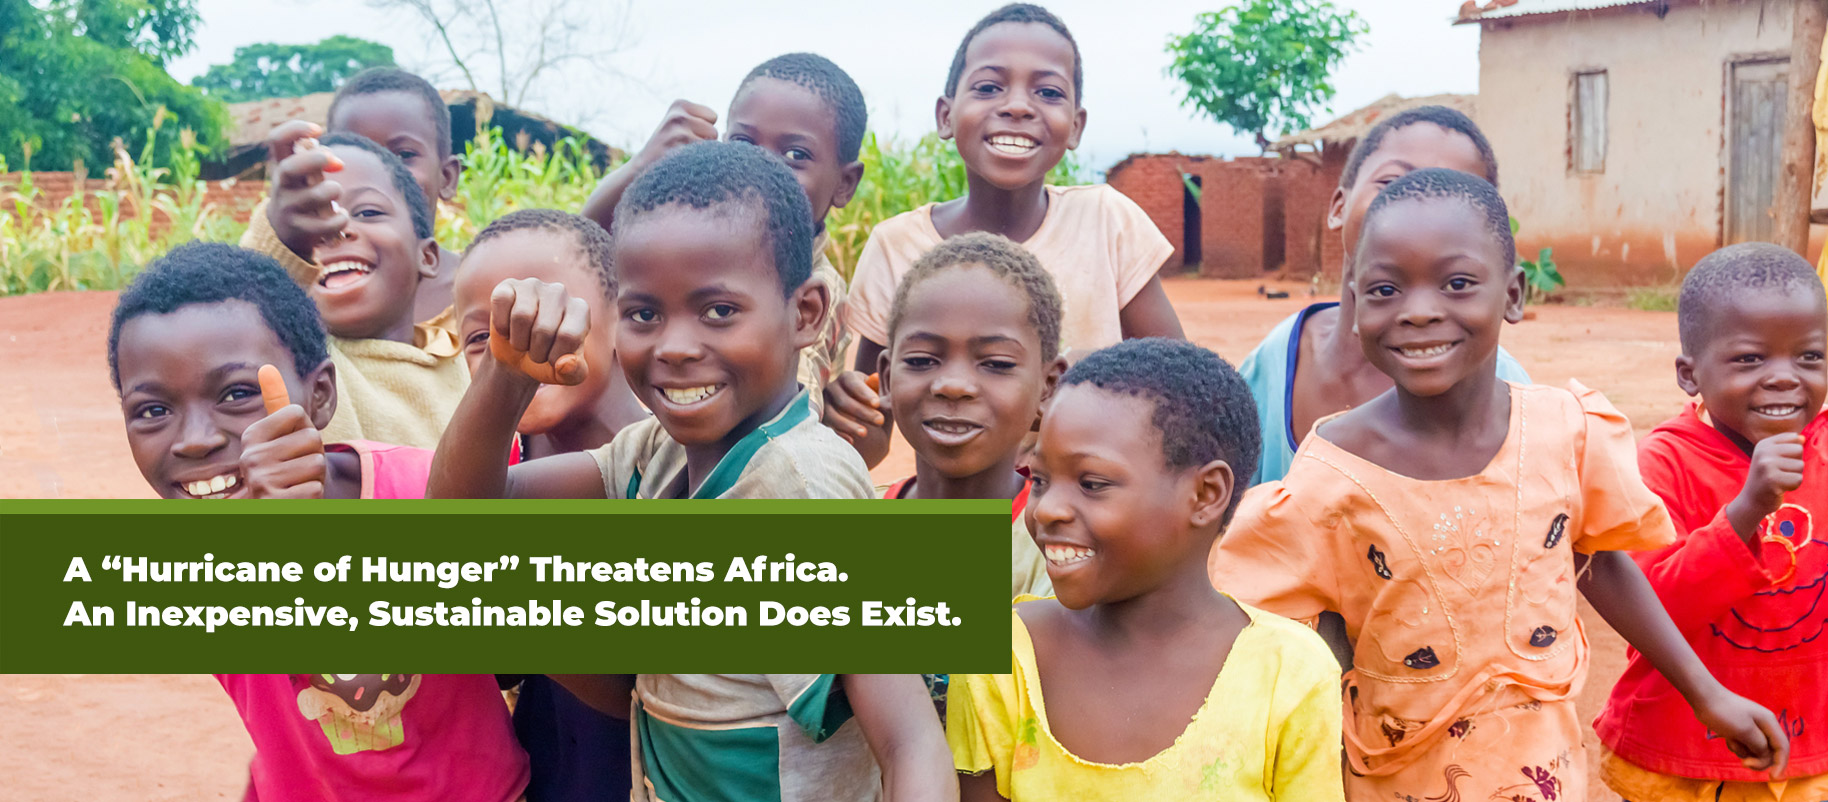 A “Hurricane of Hunger” Threatens Africa. An Inexpensive, Sustainable Solution Does Exist.